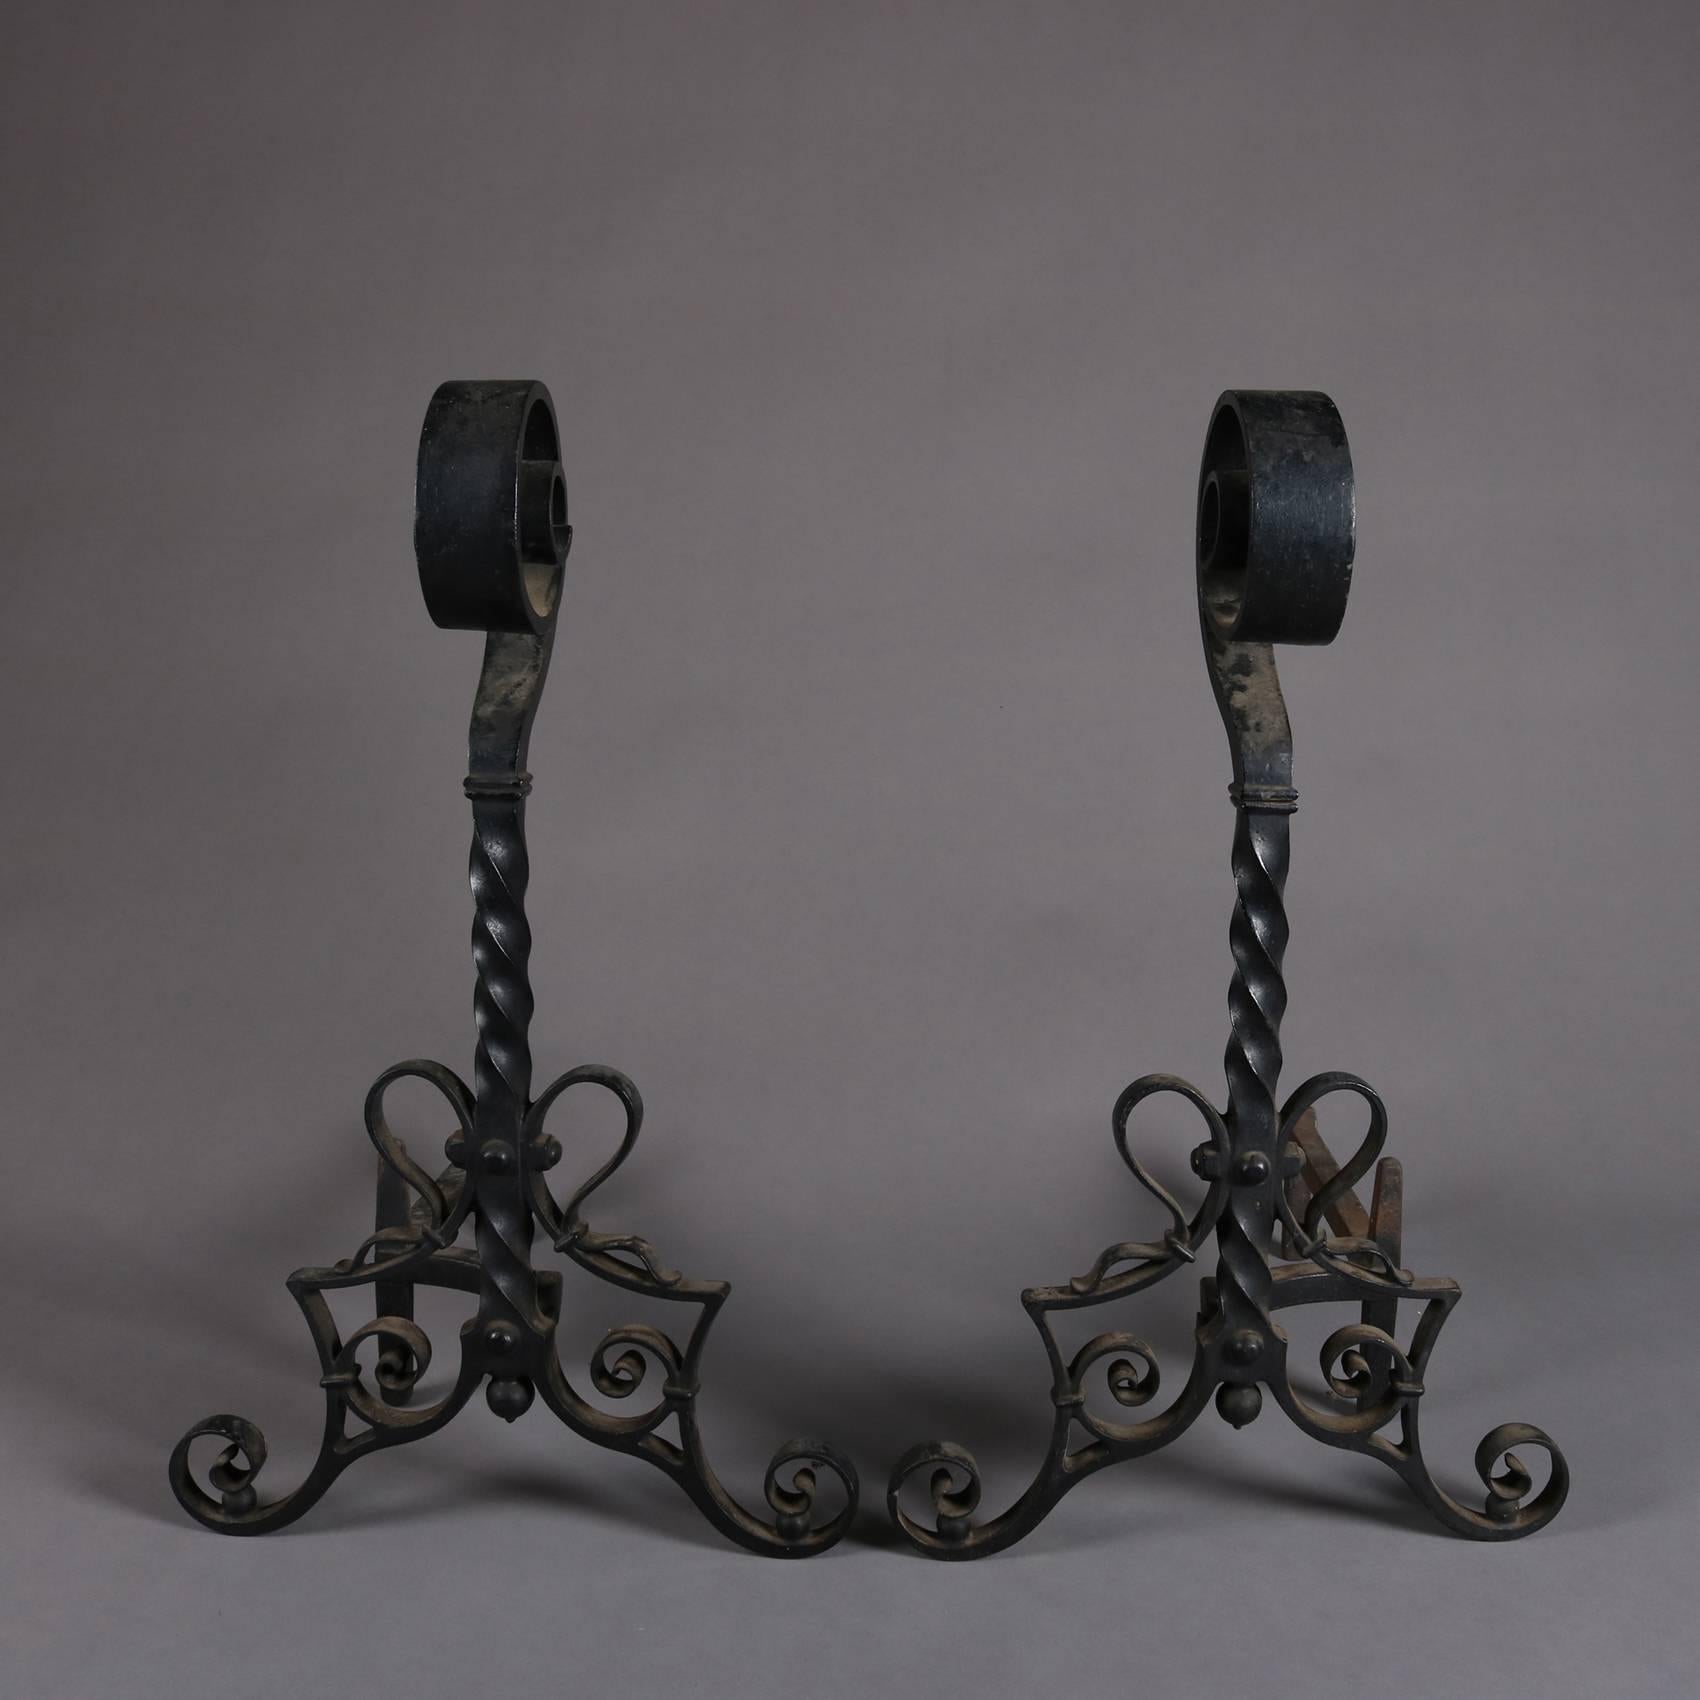 Pair of antique Arts & Crafts Mission Yellin School andirons by Bradley and Hubbard feature wrought iron construction with spiral scroll finial, twisted shafts and seated on scrollwork legs, signed B&H, early 20th century.

Measures: 24